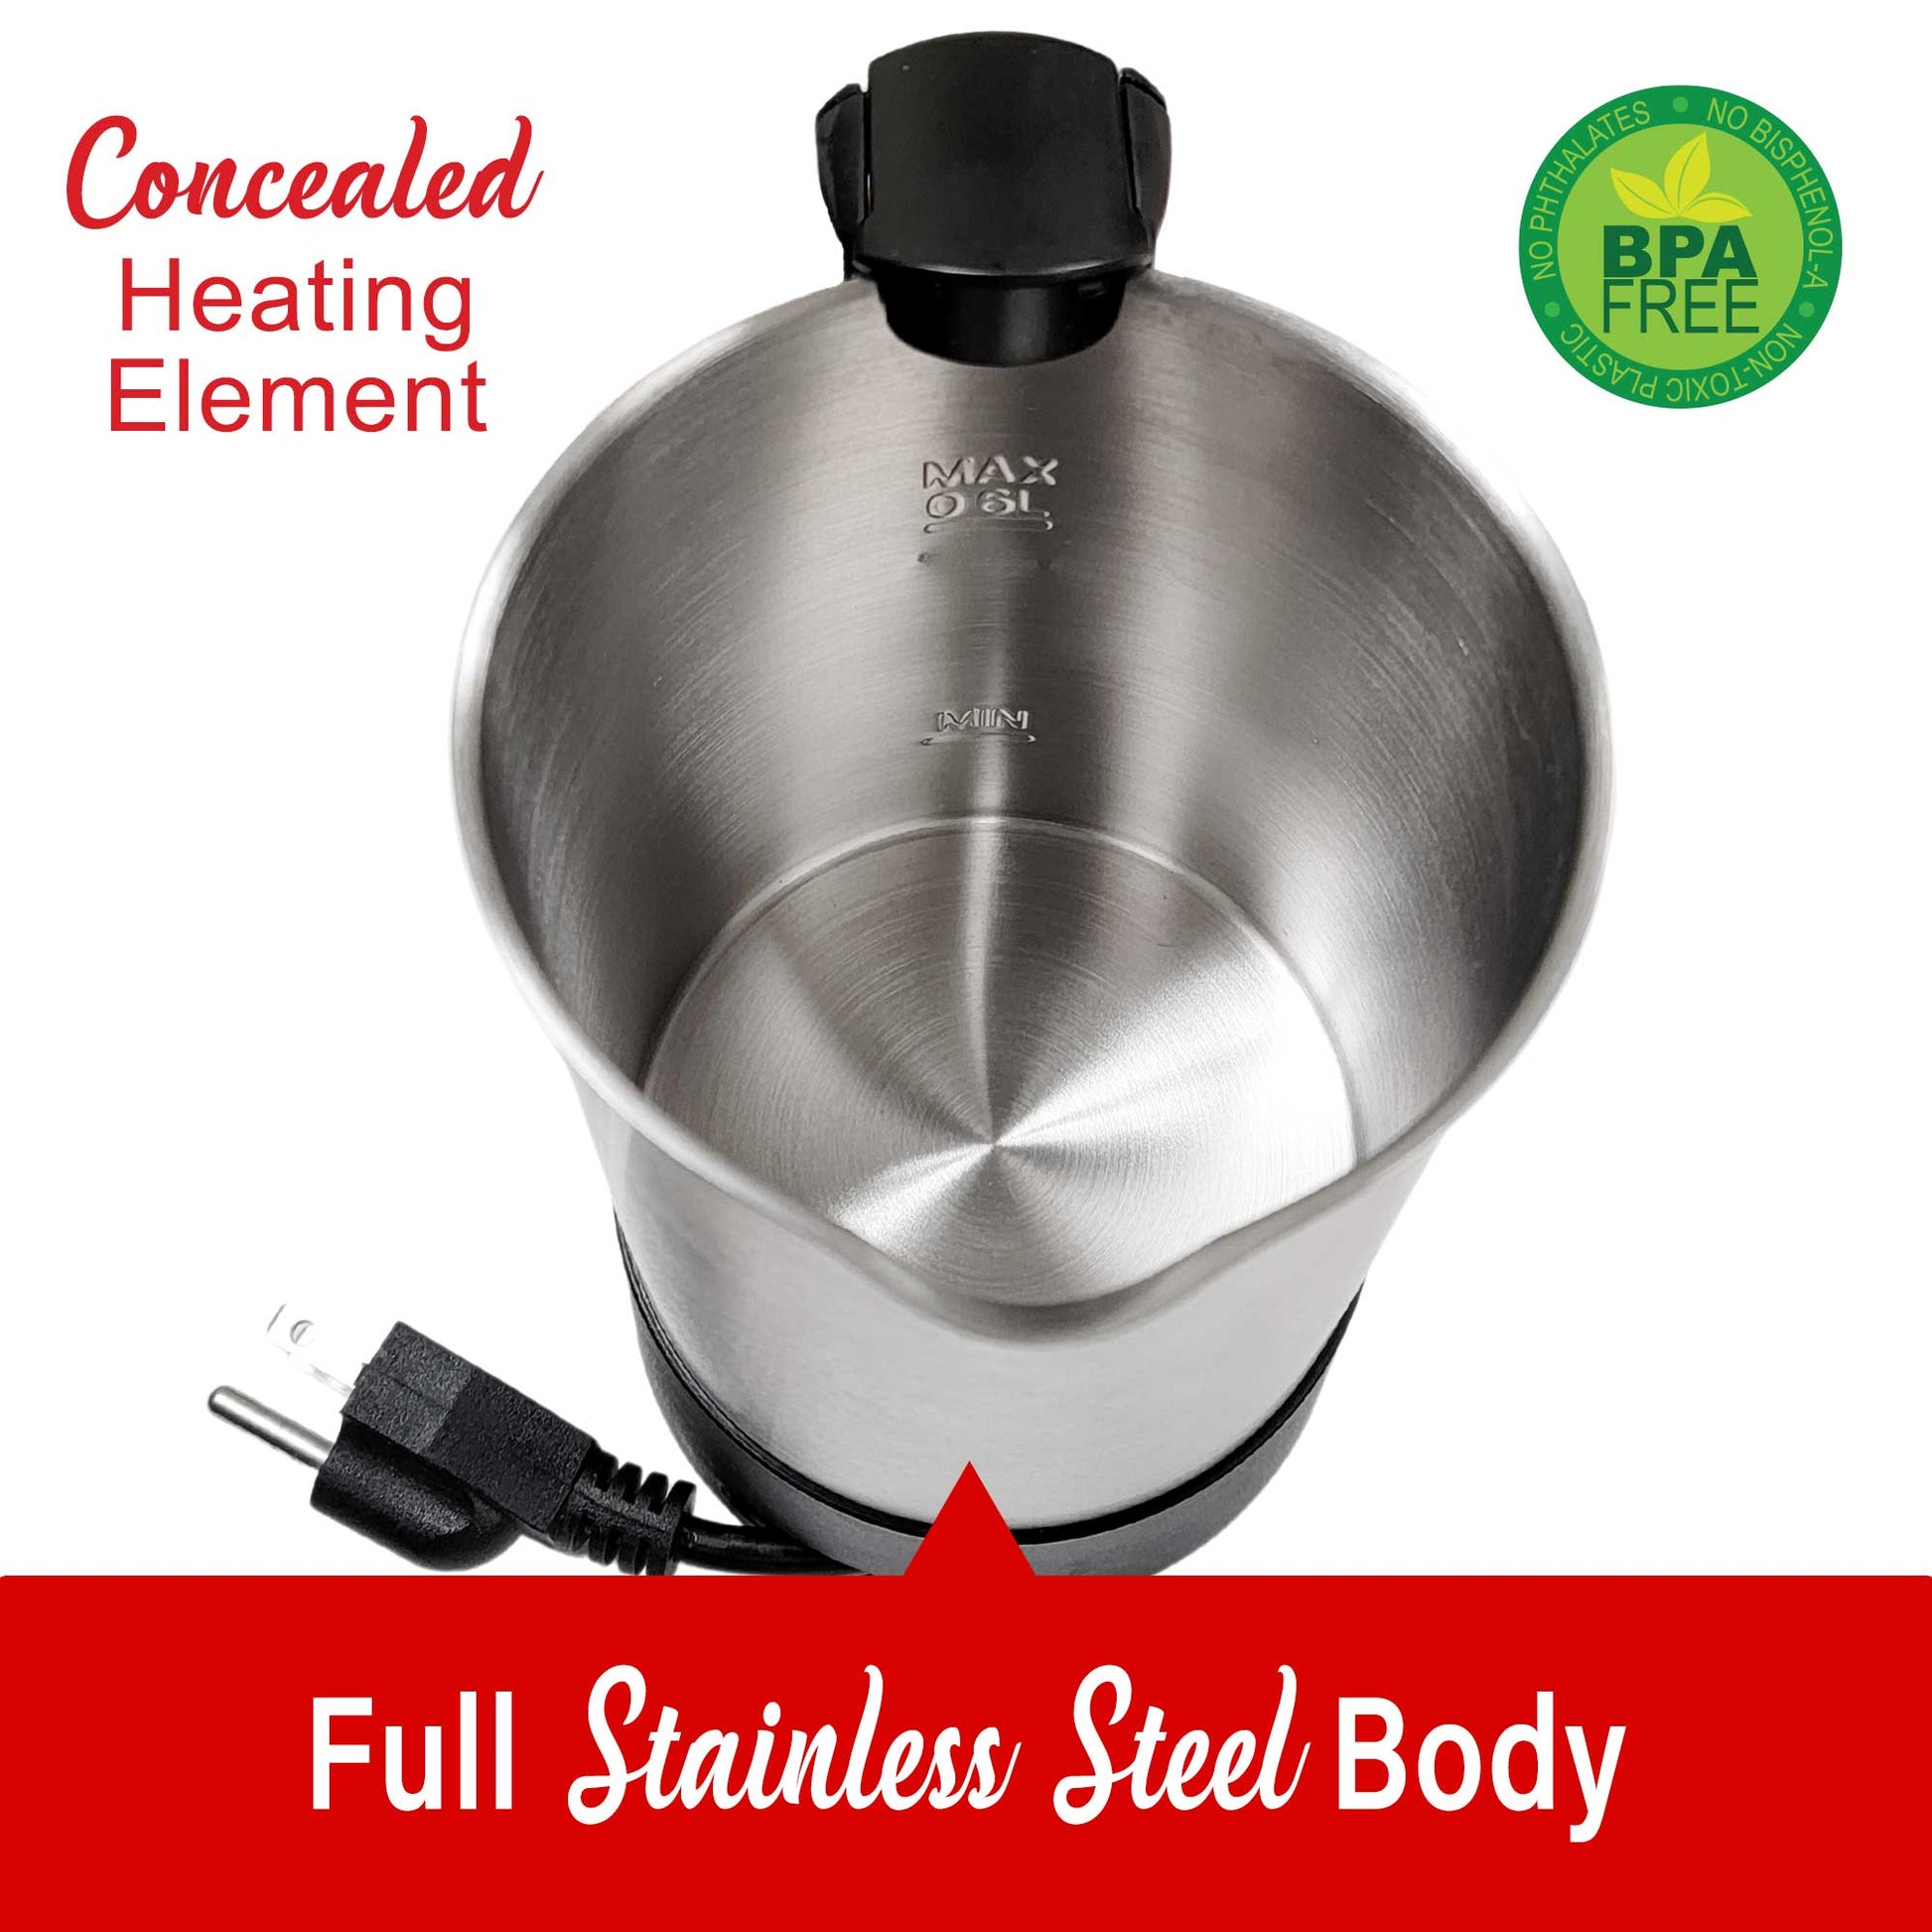 2.5 Cups Brentwood Stainless Steel Travel Kettle – R & B Import